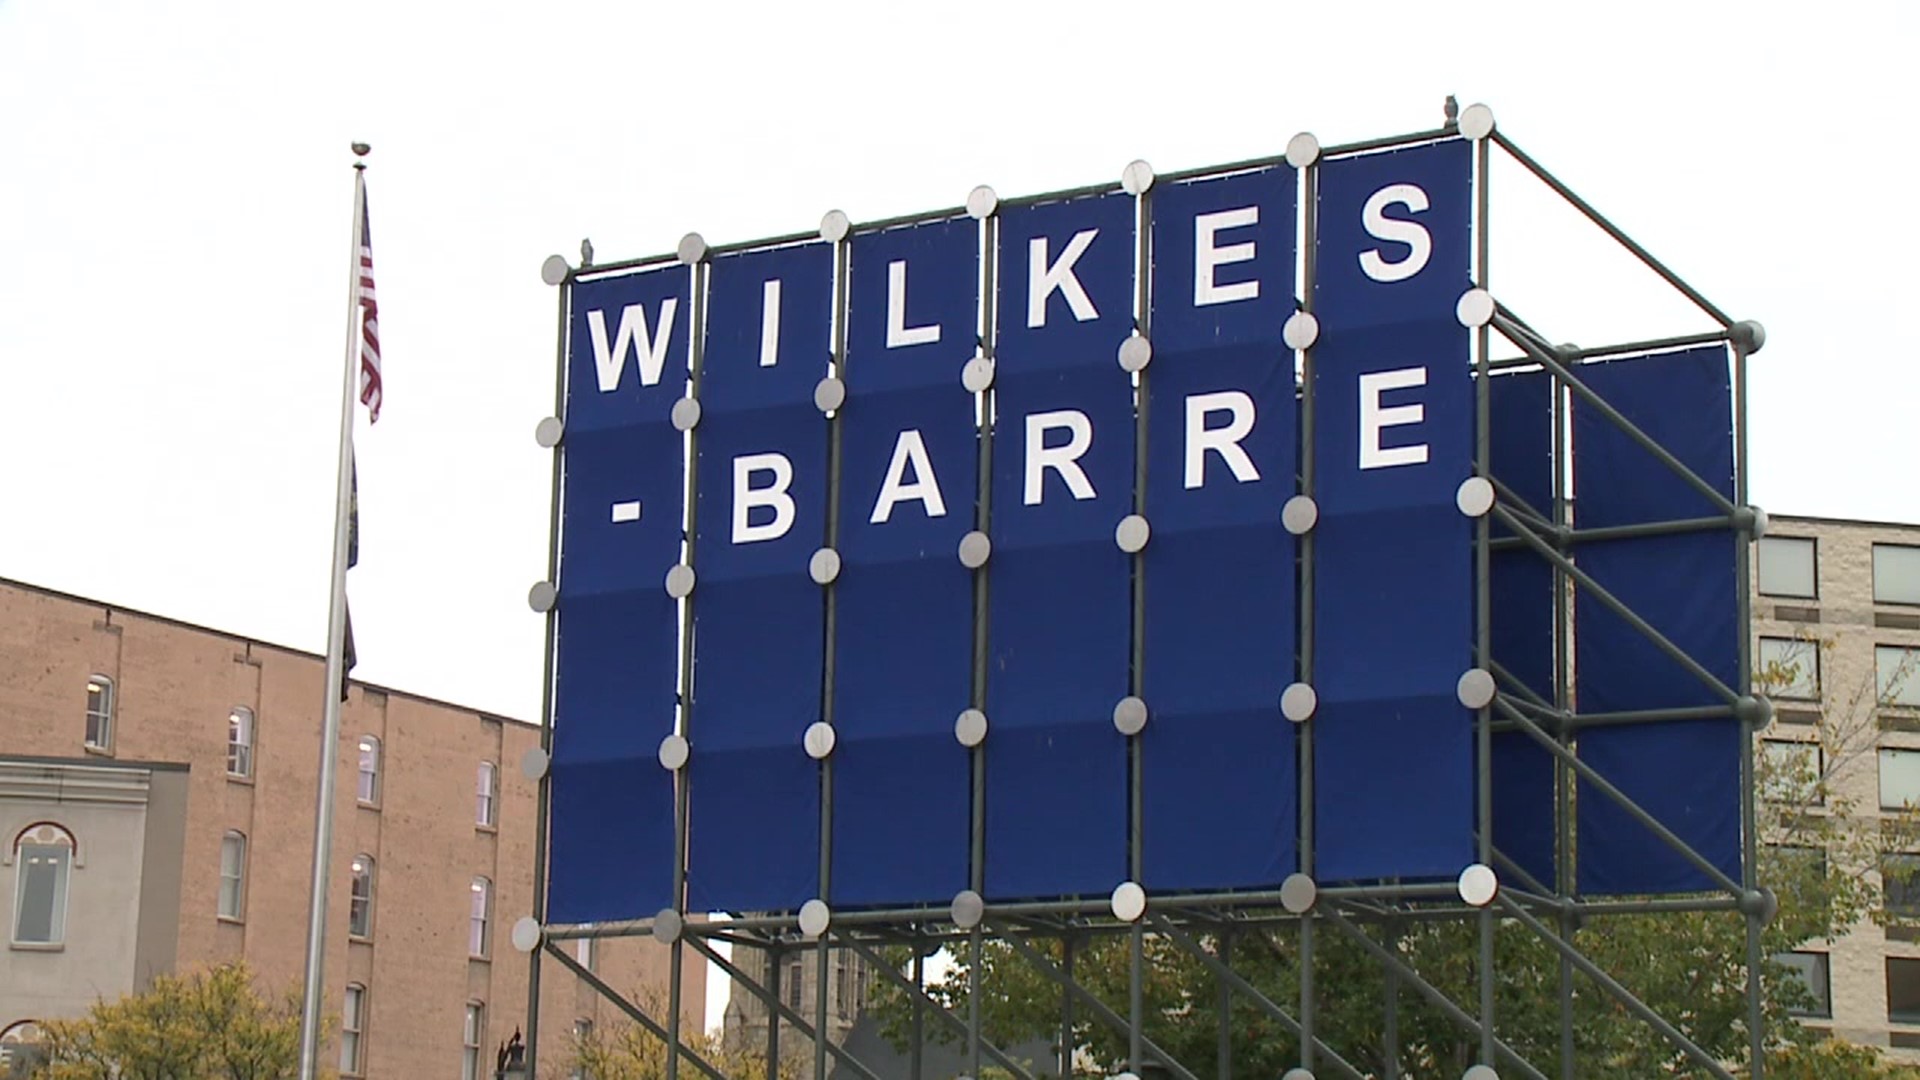 The money comes from Wilkes-Barre's $37.1 million share of the American Recovery Plan.